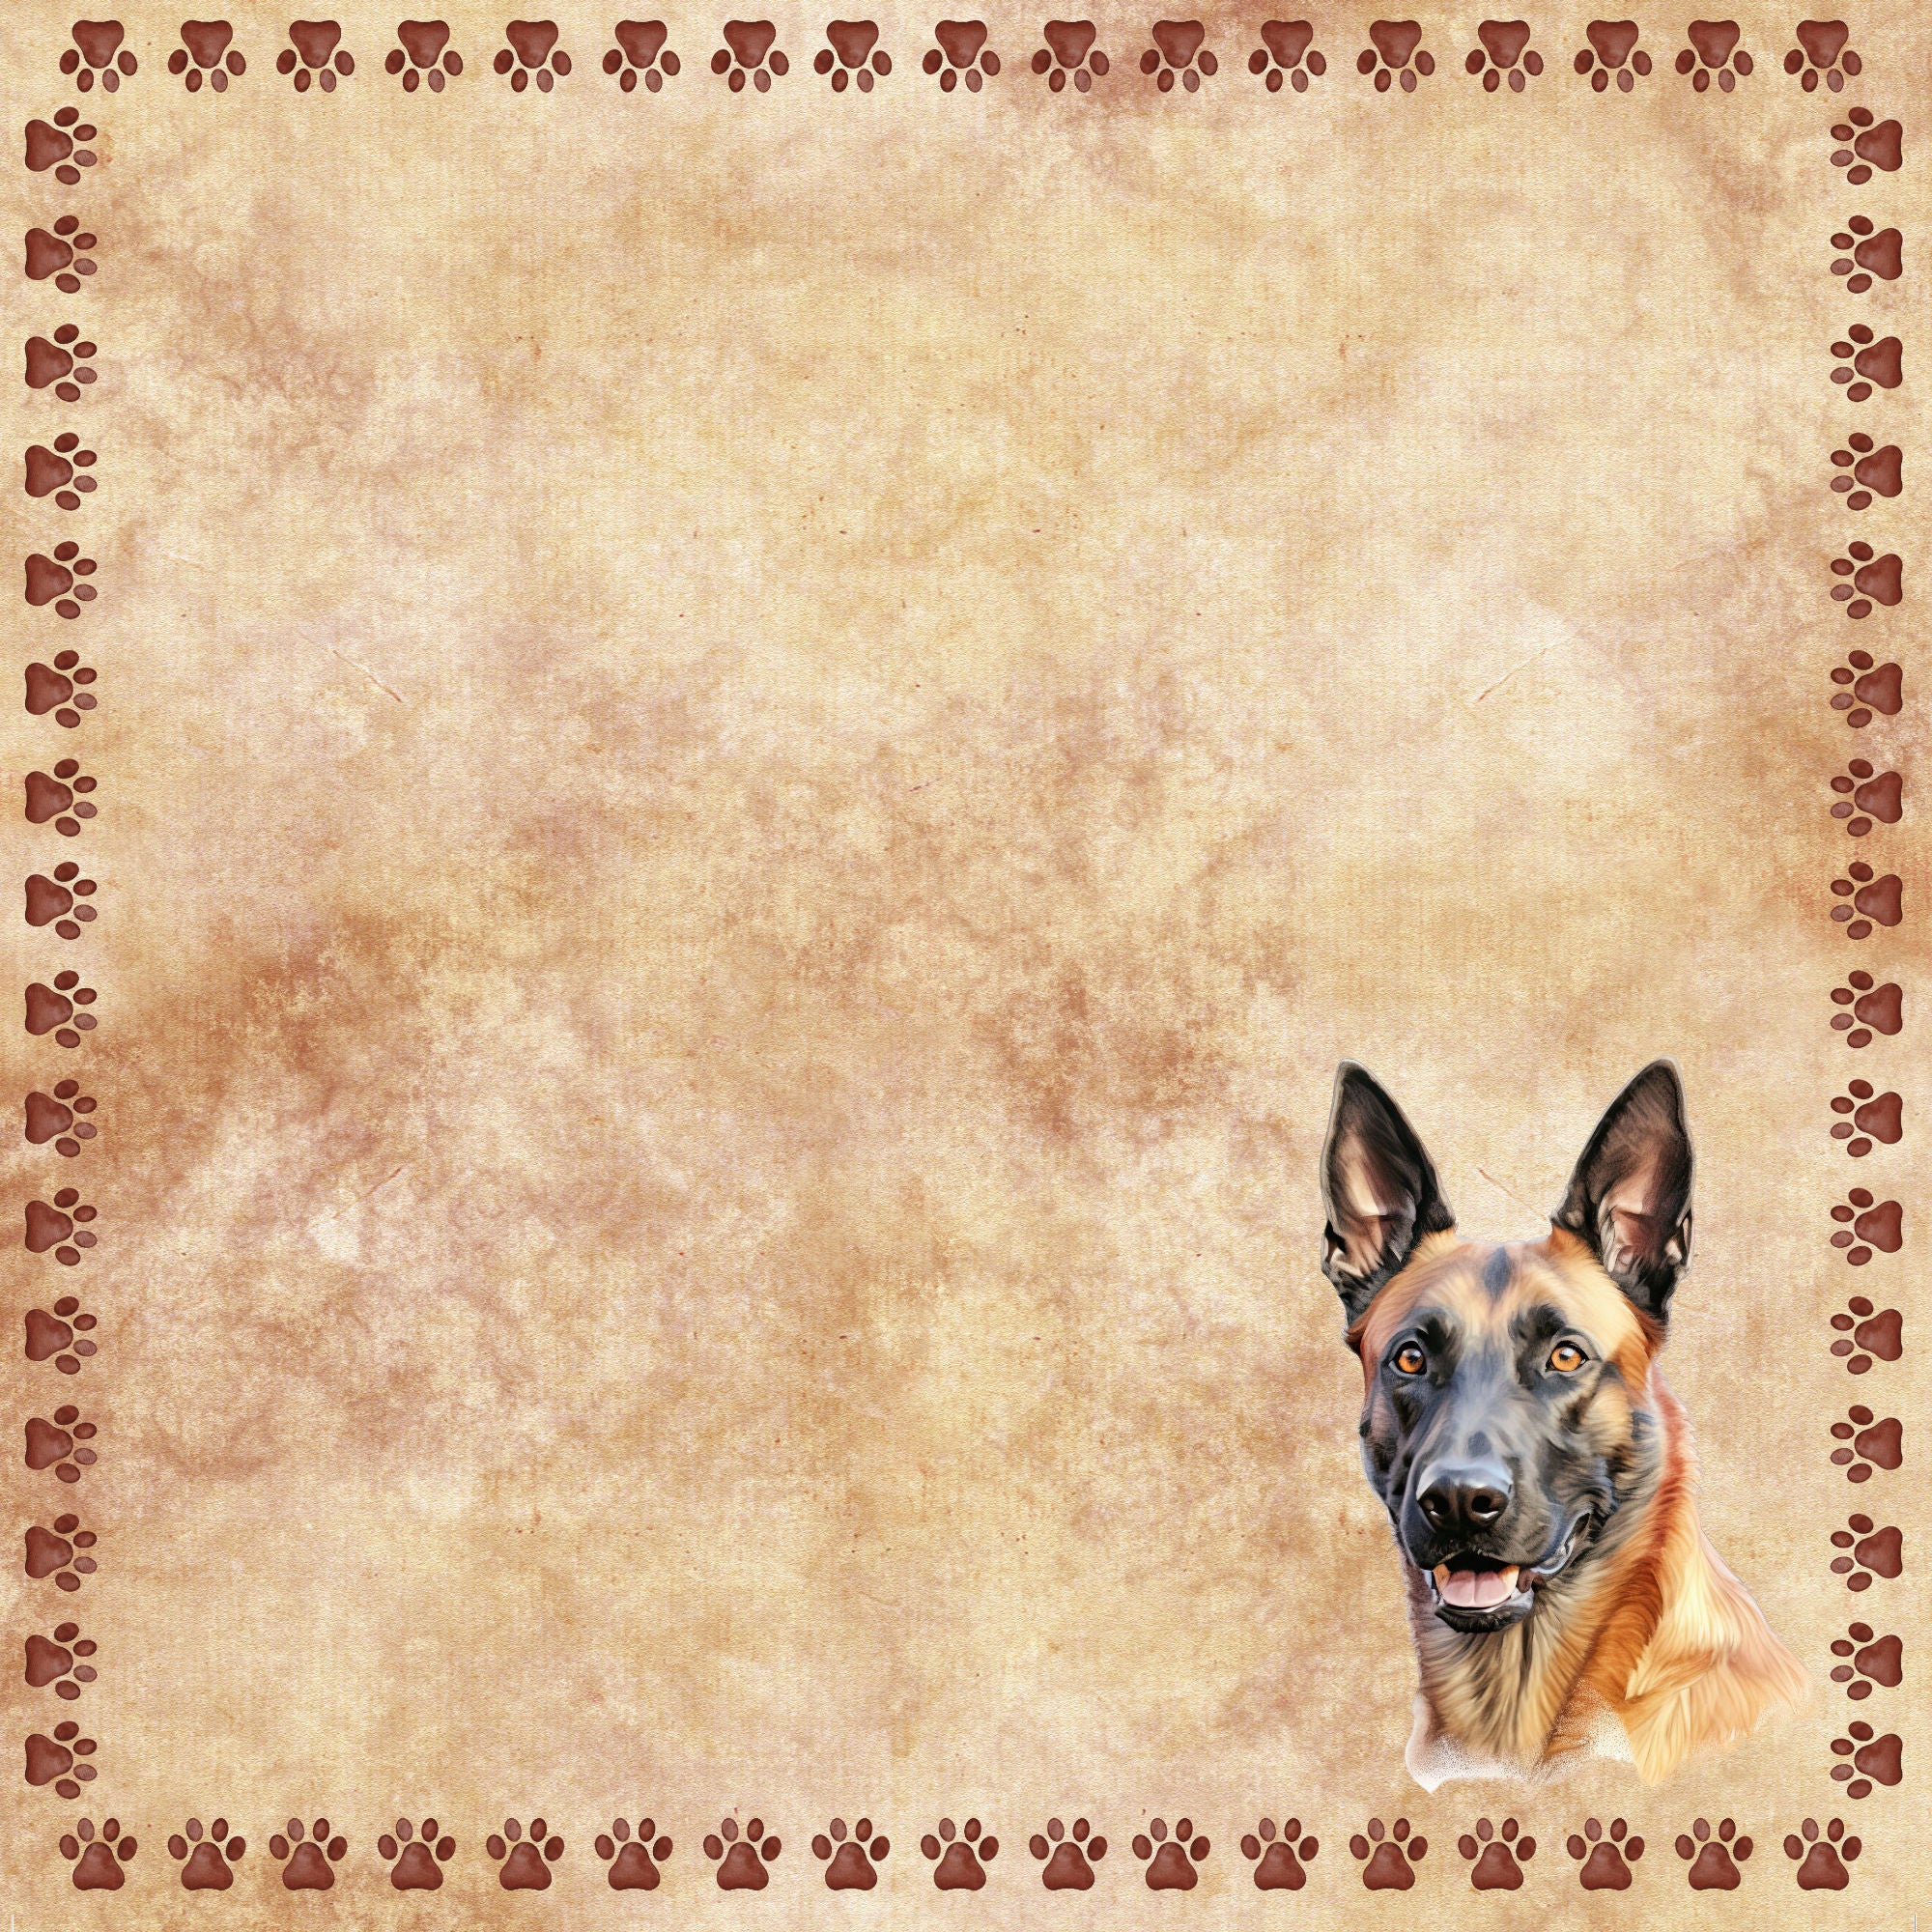 Dog Breeds Collection Belgian Malinois 12 x 12 Double-Sided Scrapbook Paper by SSC Designs